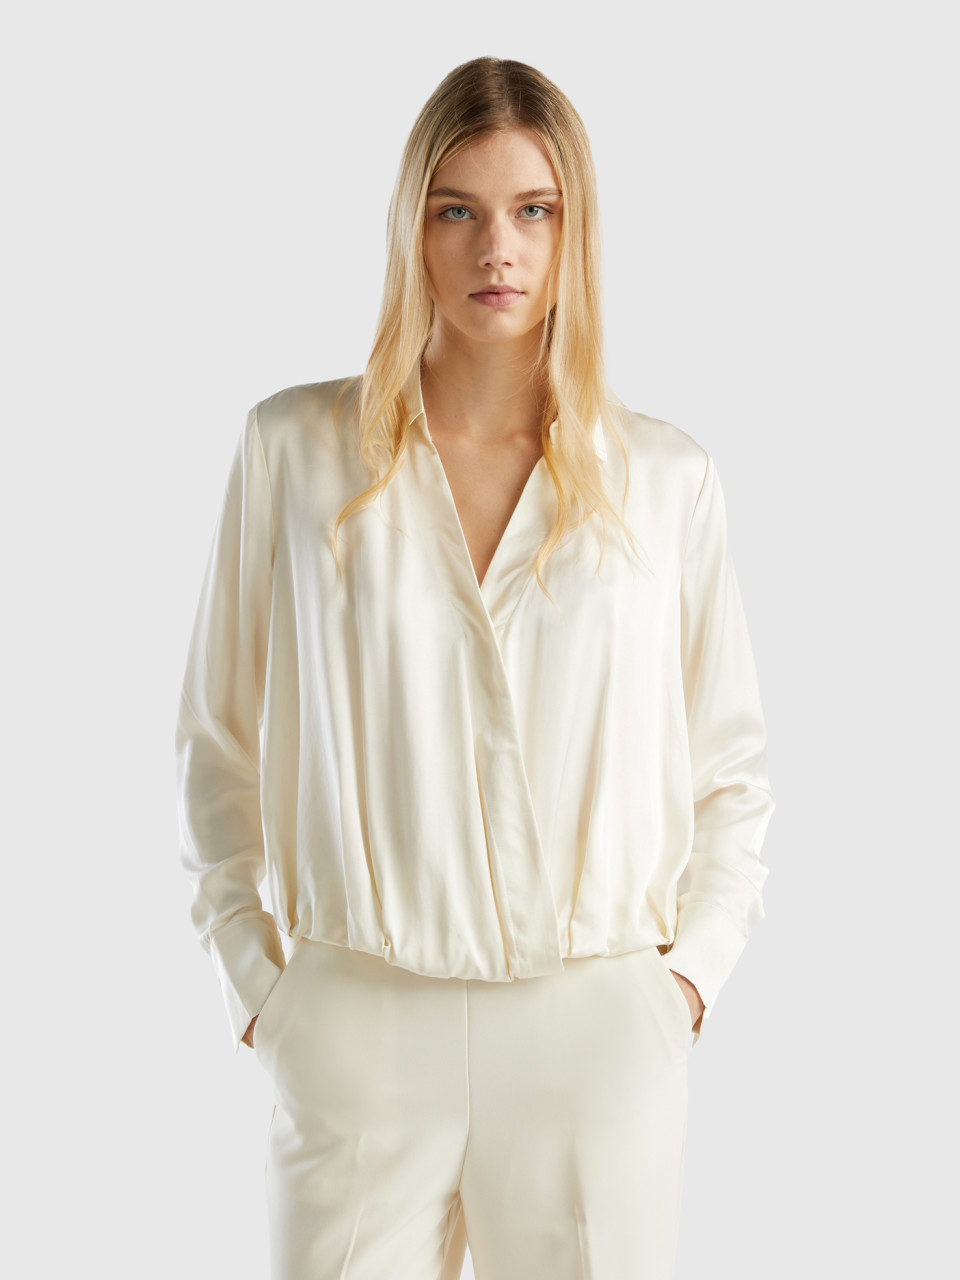 Benetton, Blouse In Viscose And Modal® Blend, Creamy White, Women